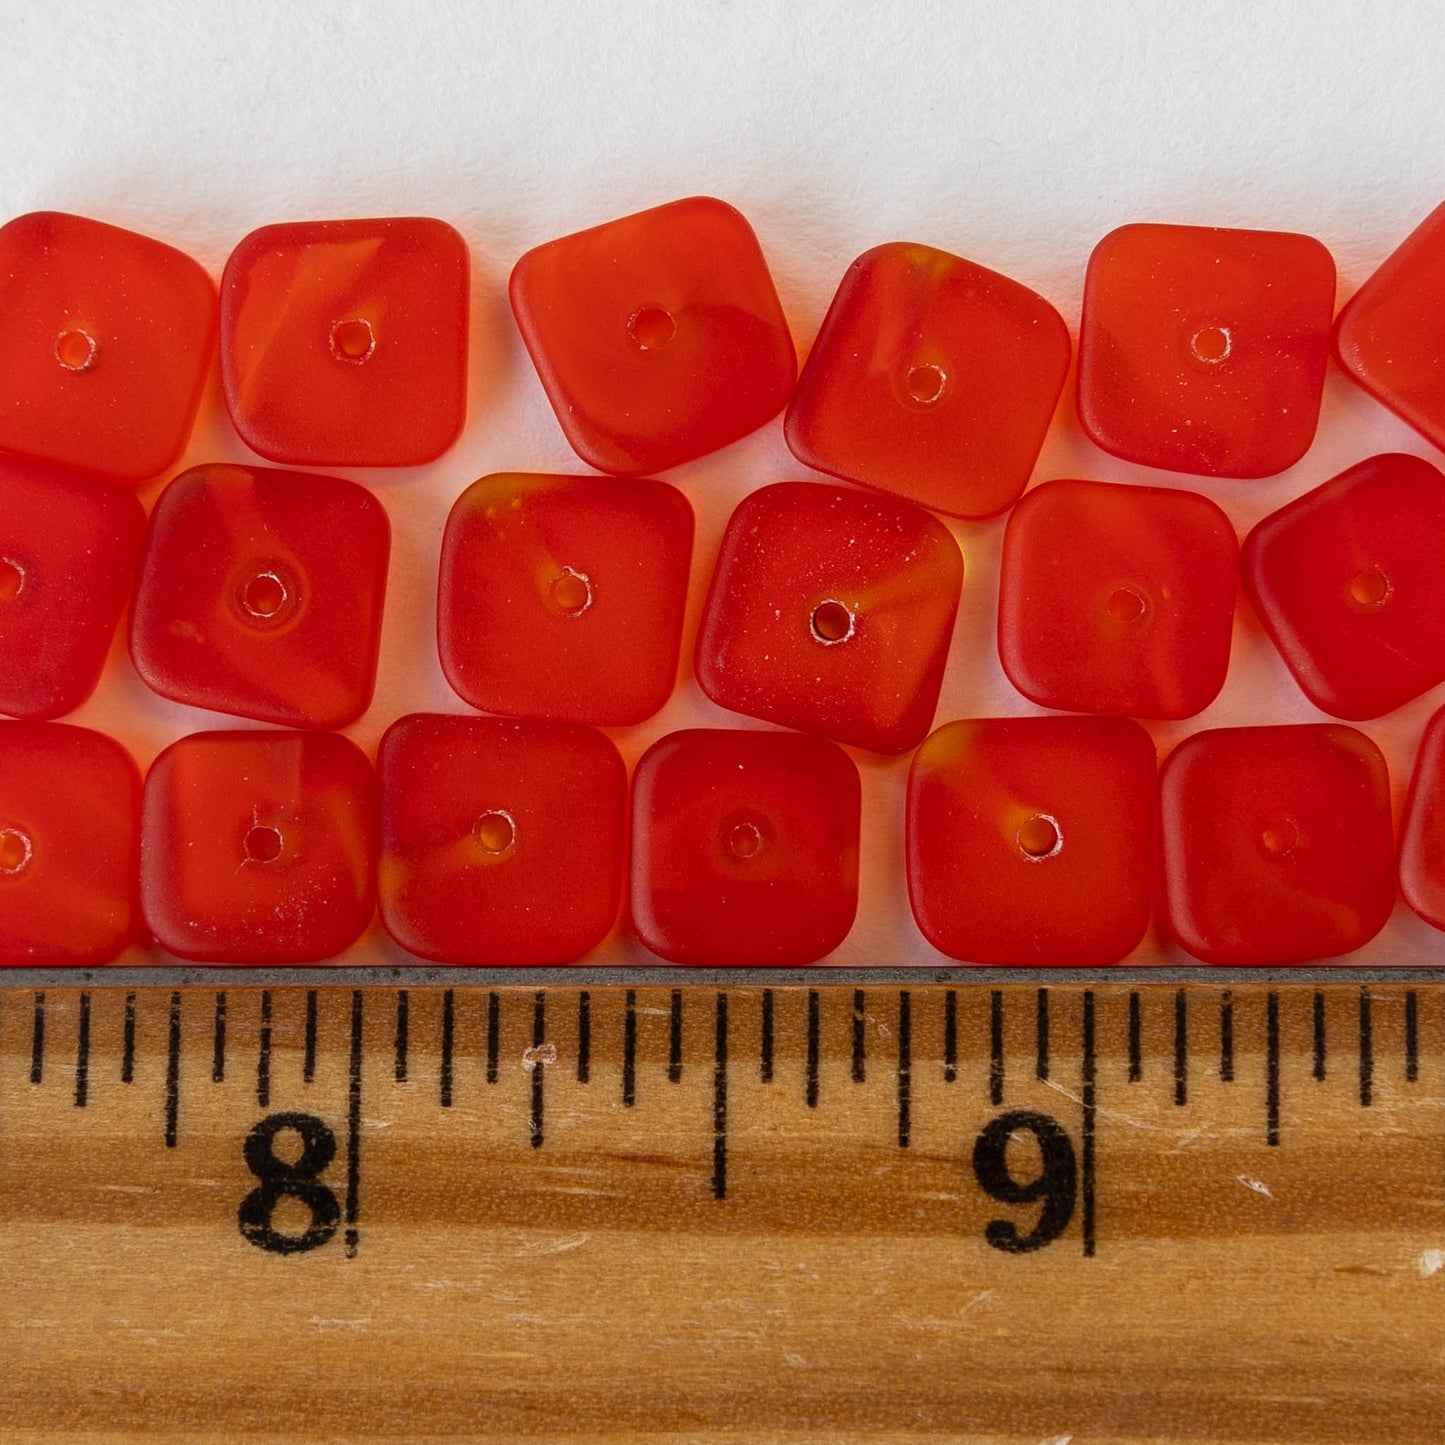 9mm Square Heishi Beads - Red - 25 Beads